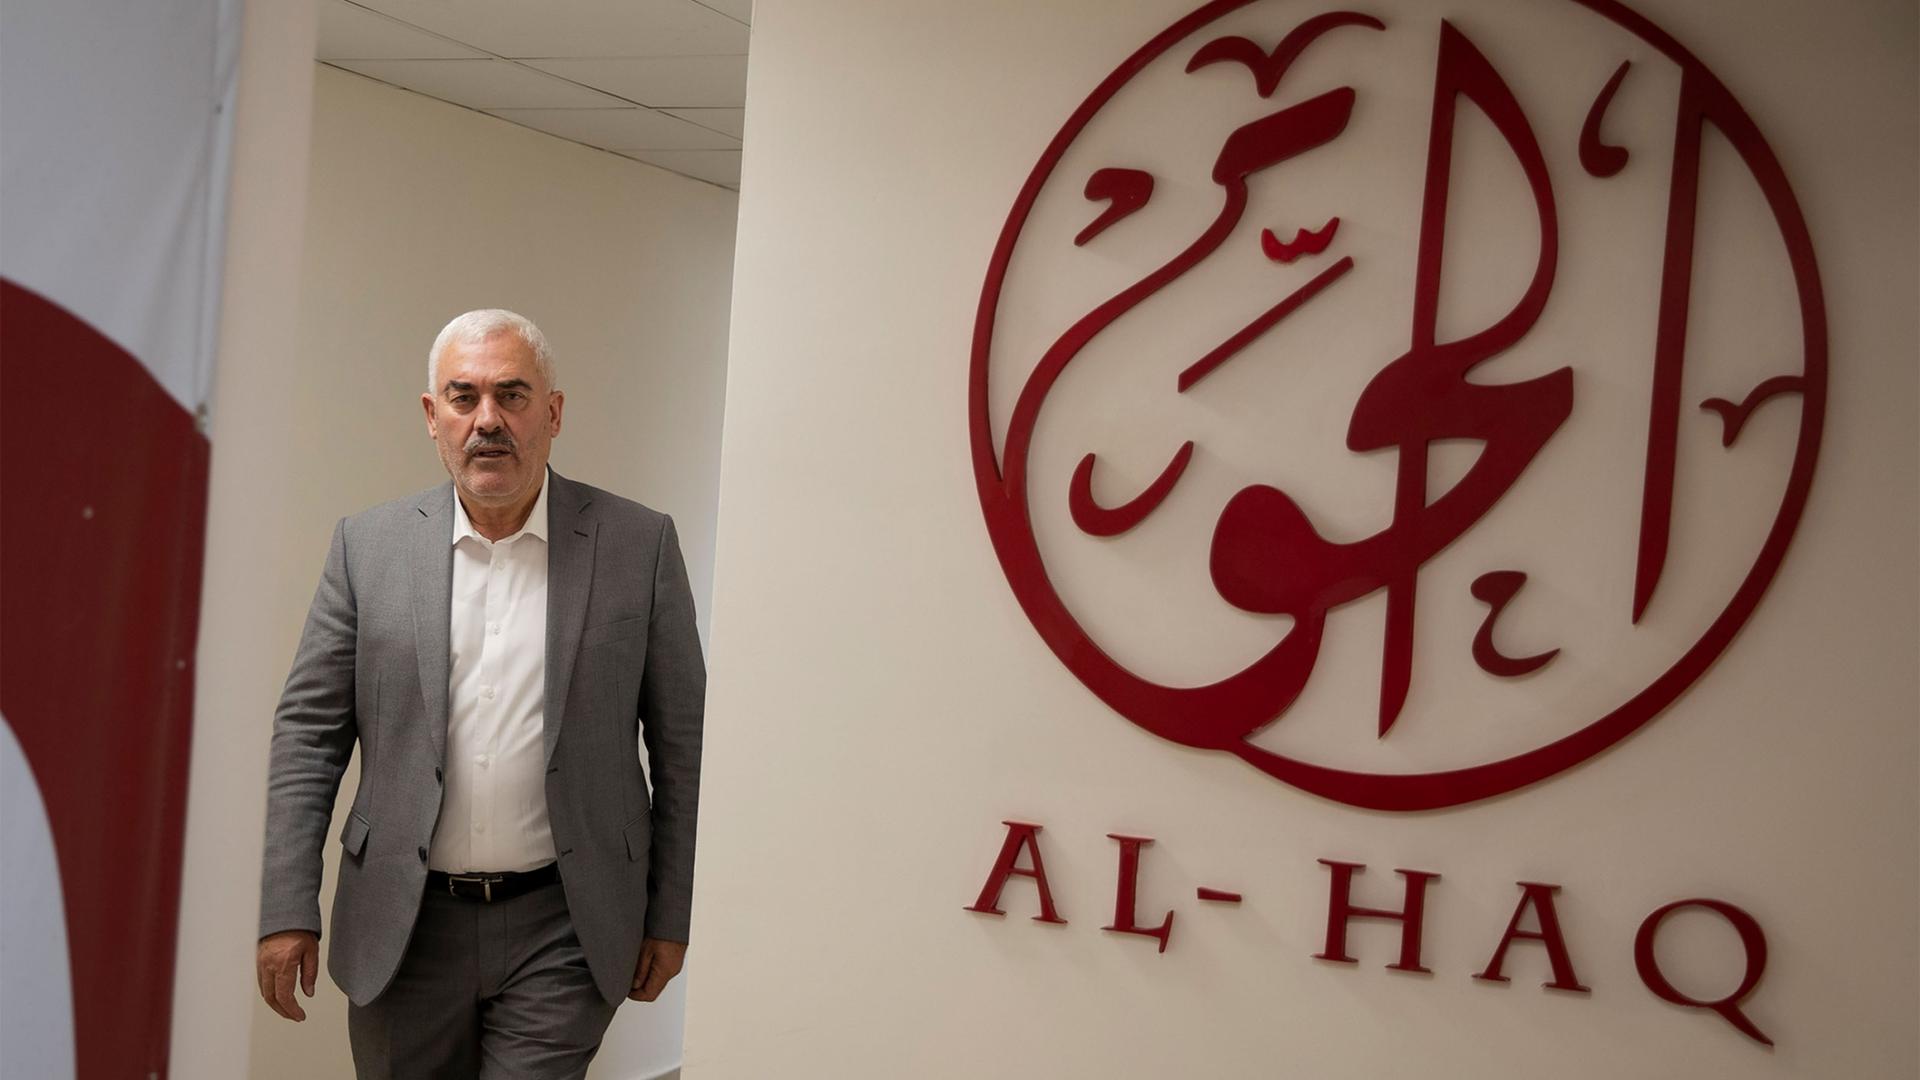 Shawan Jabarin, director of the al-Haq human rights group, at the organization's offices in the West Bank city of Ramallah